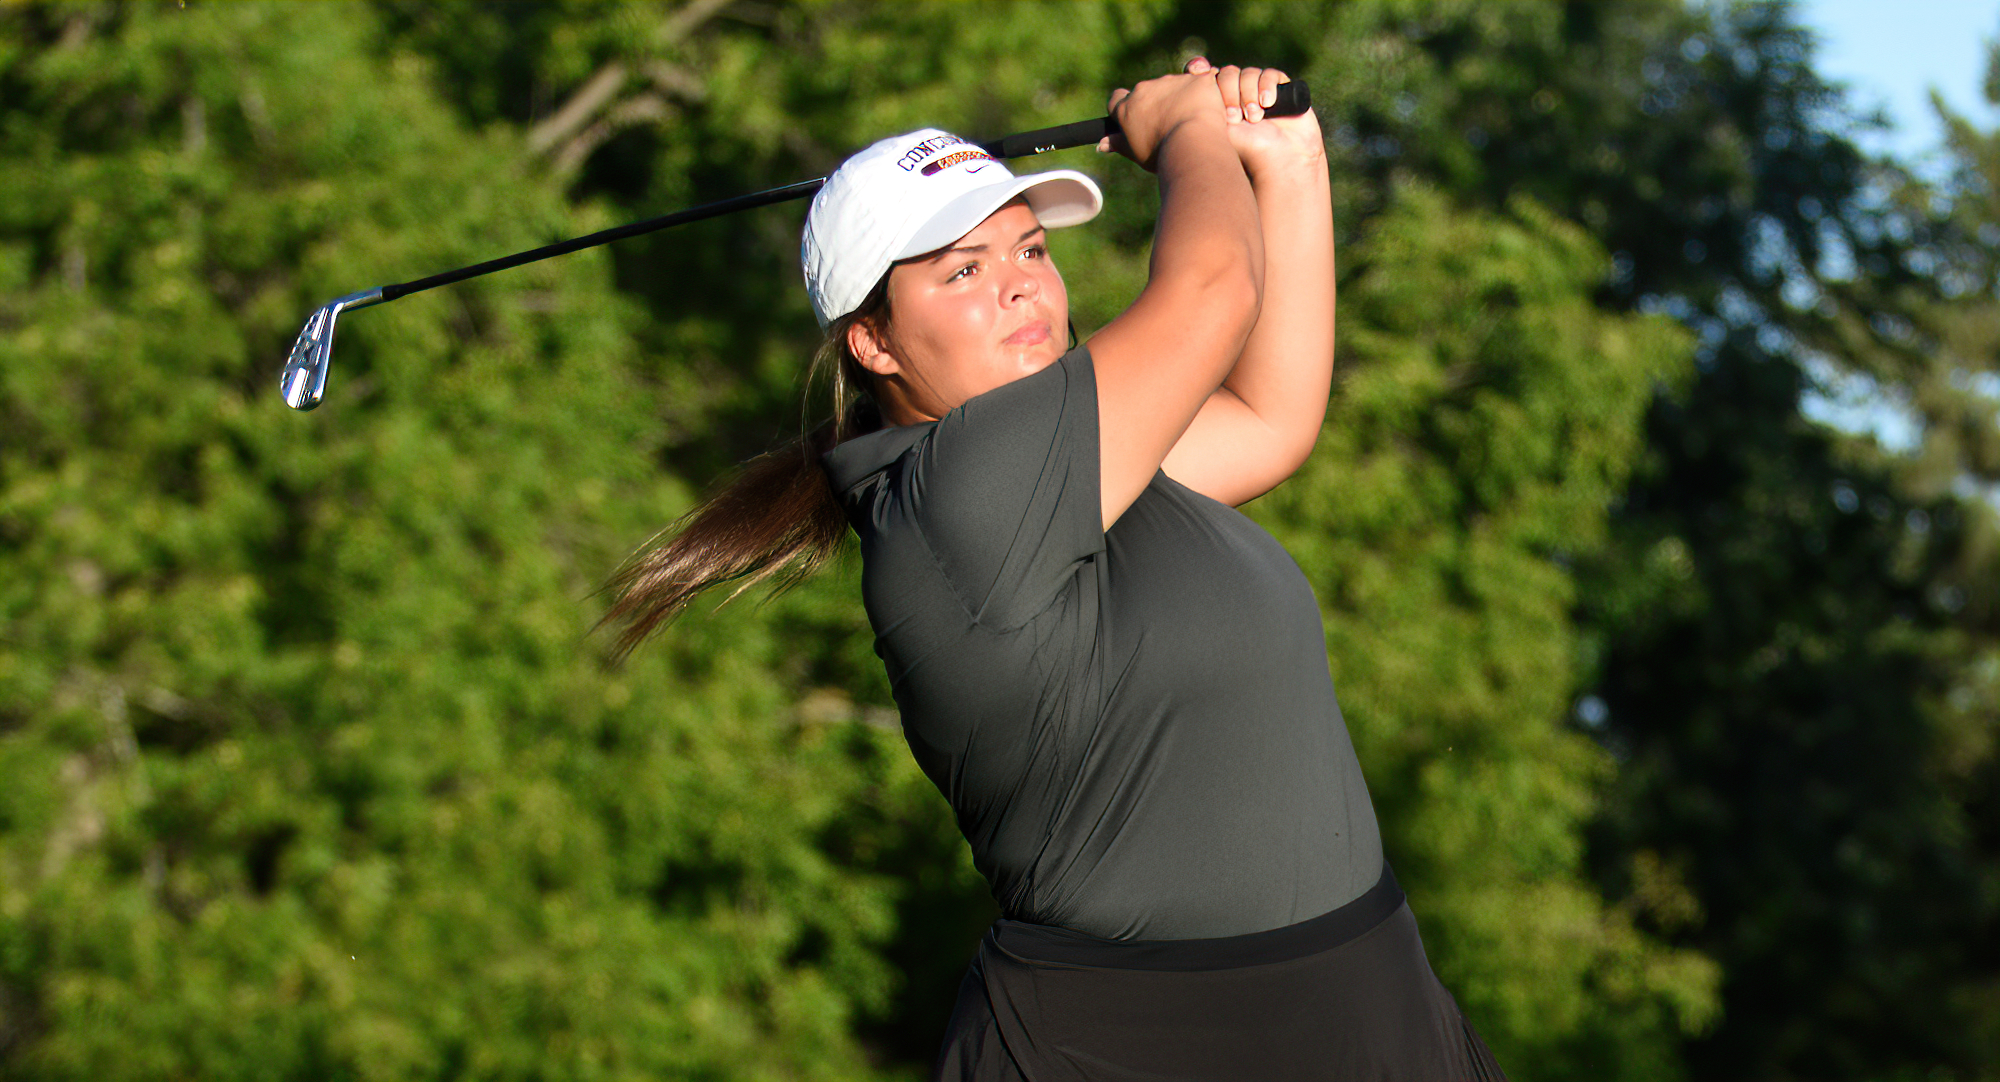 Freshman Lauren Lamp had the best tournament of her college career as she shot a season-best 82 on Sunday and helped CC to a team score of 330.